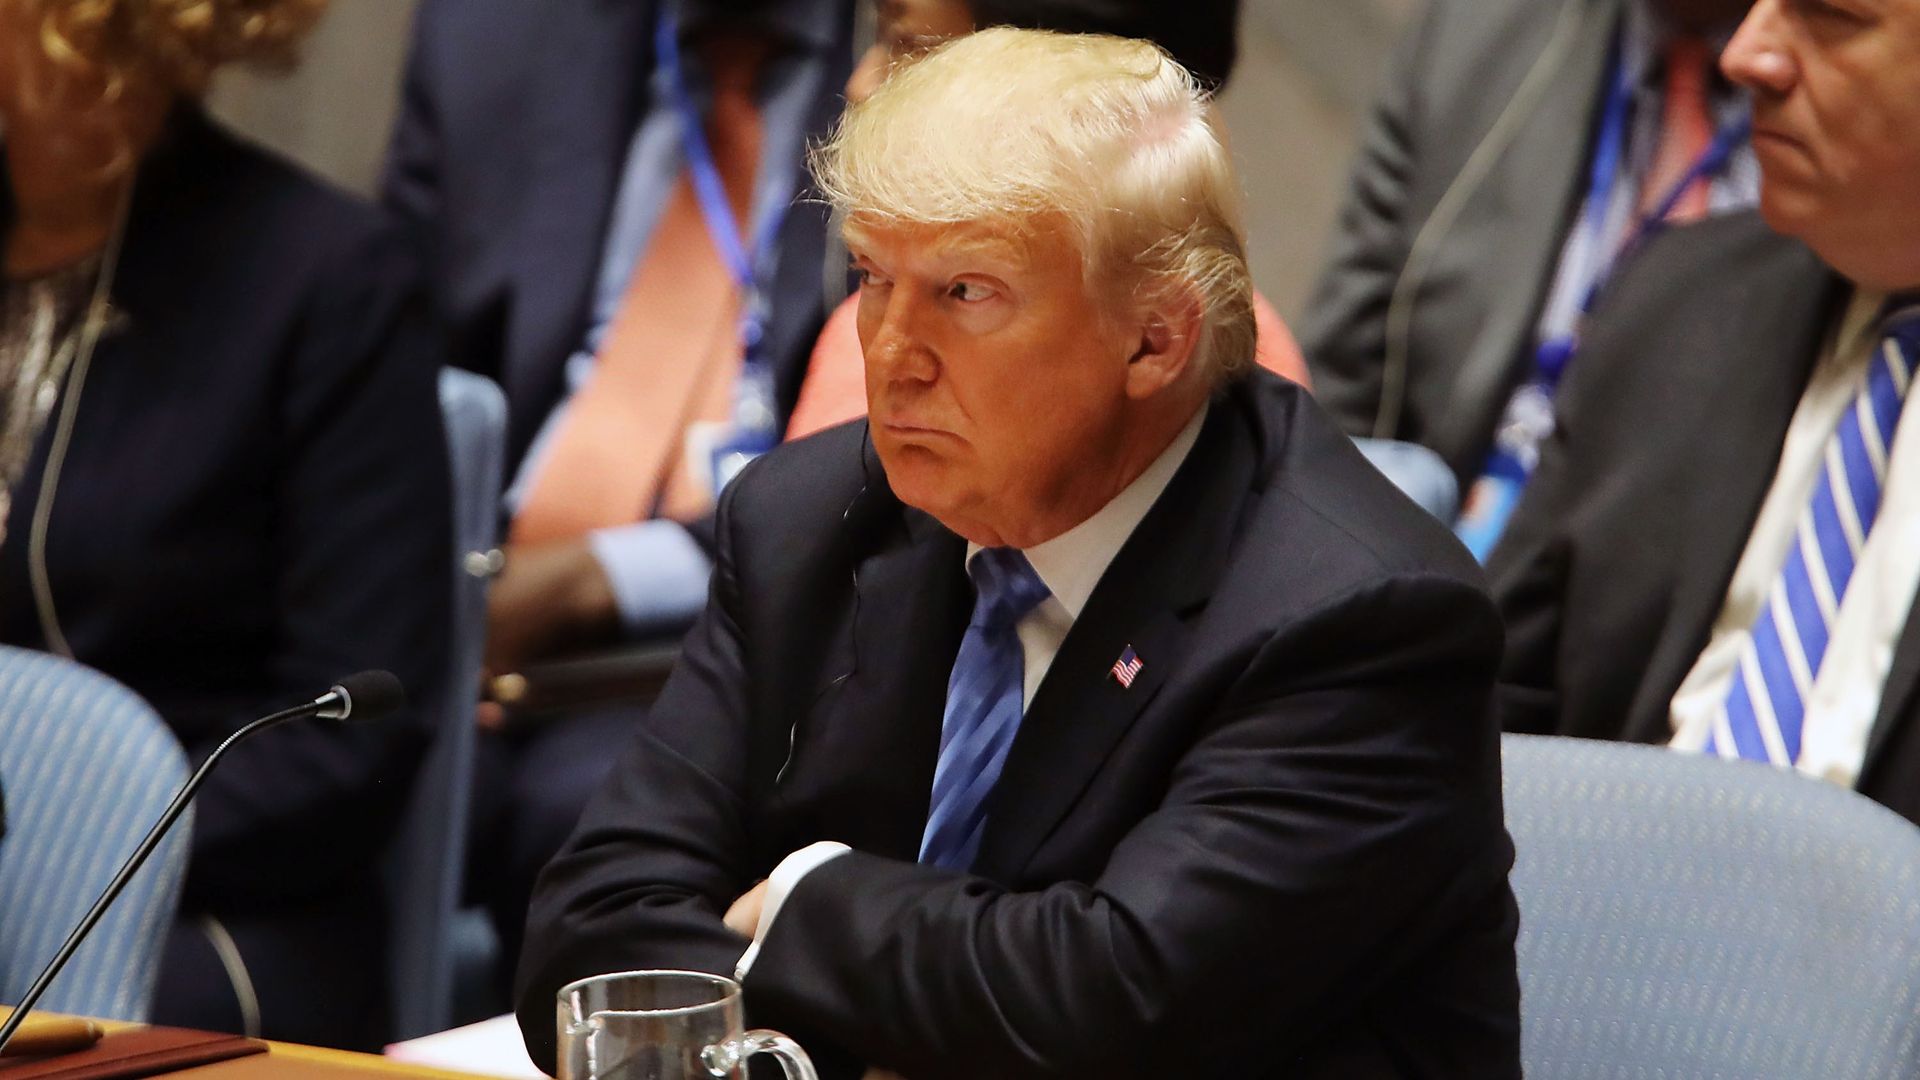 Donald Trump sitting with arms crossed at the table during UN Security Council meeting